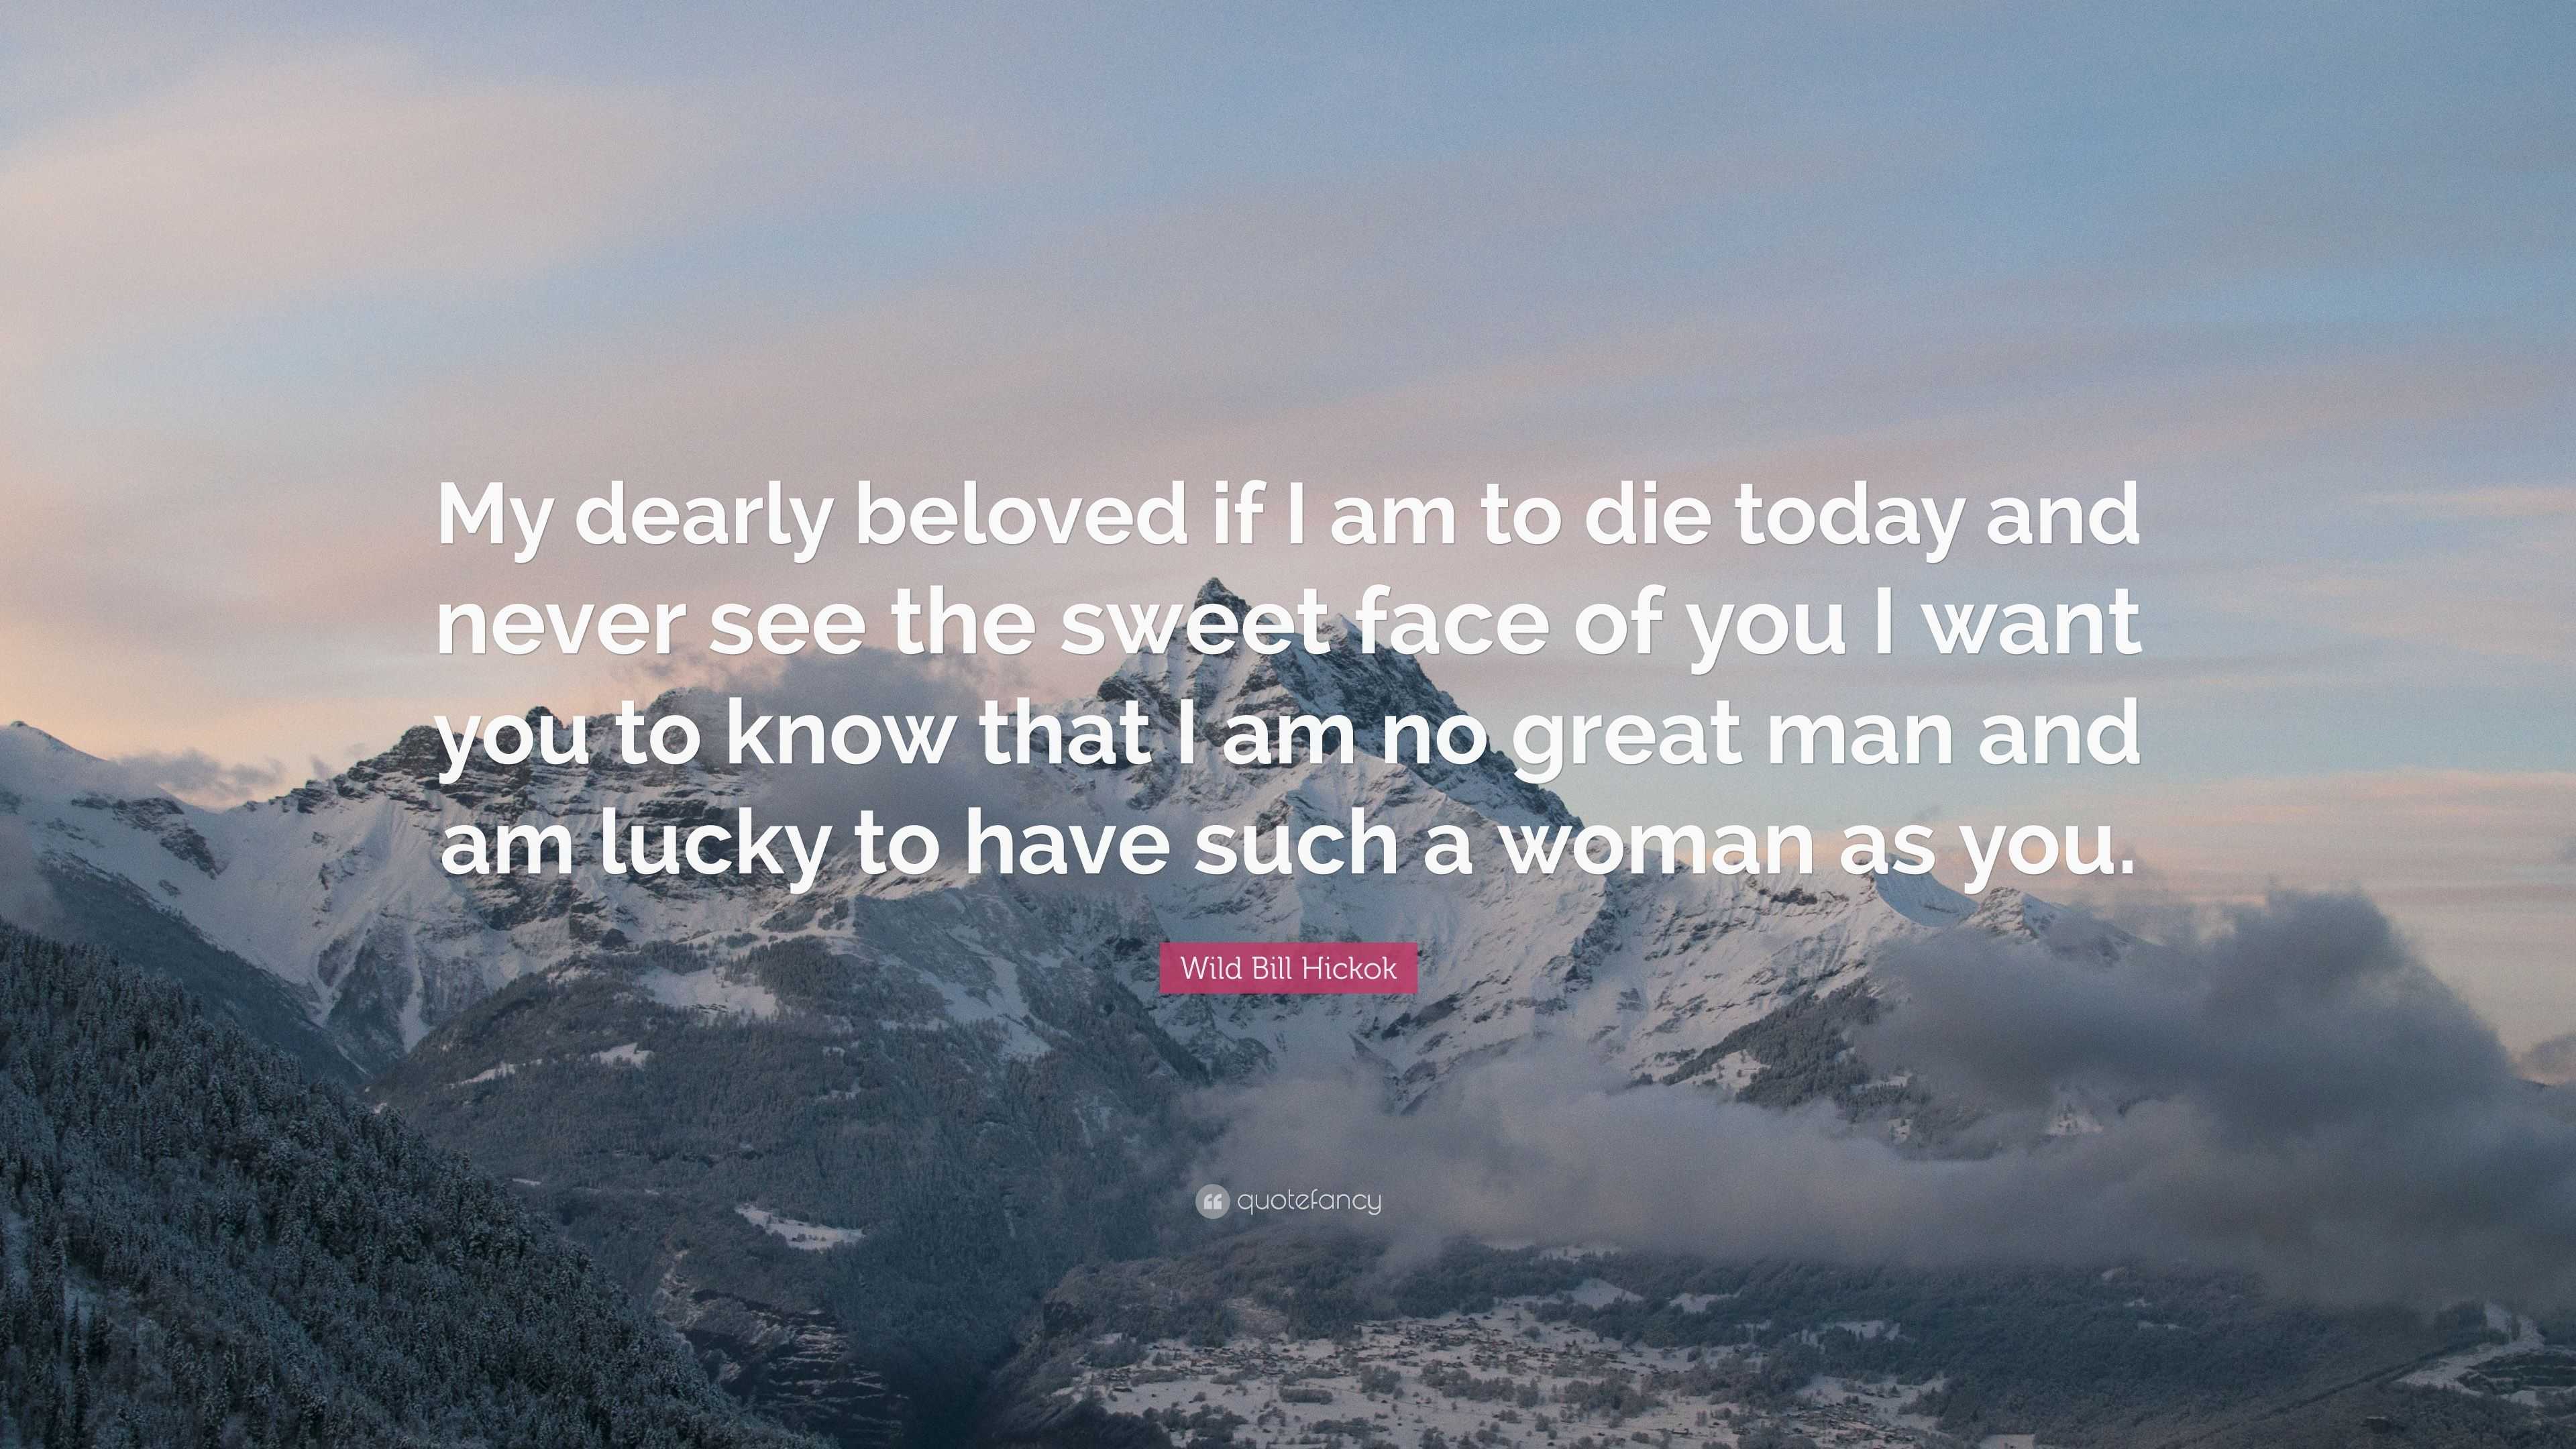 Wild Bill Hickok Quote: “My dearly beloved if I am to die today and ...